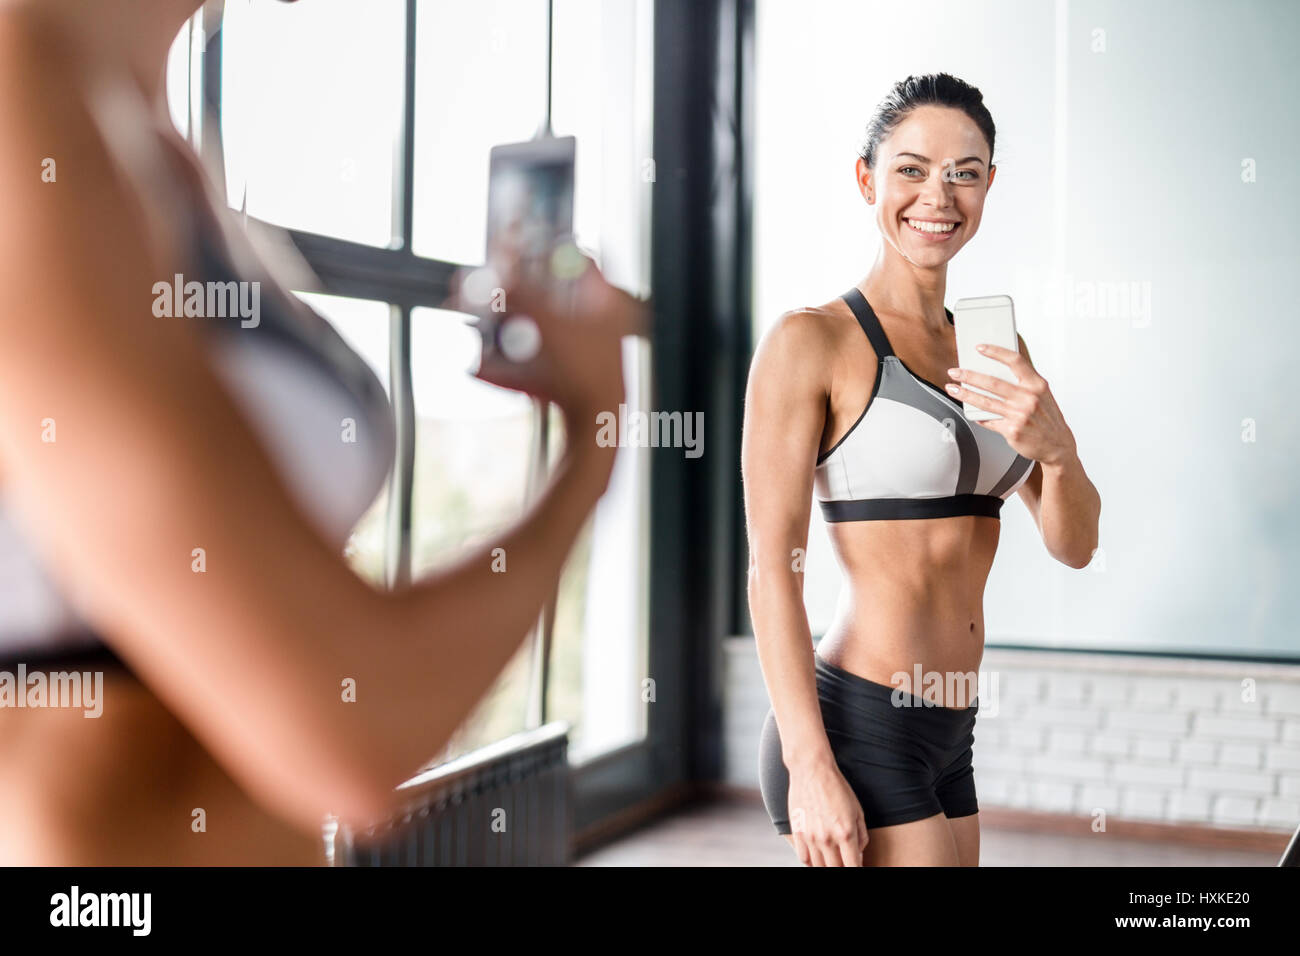 Young Sportive Woman Taking Mirror Selfie in Gym Stock Photo